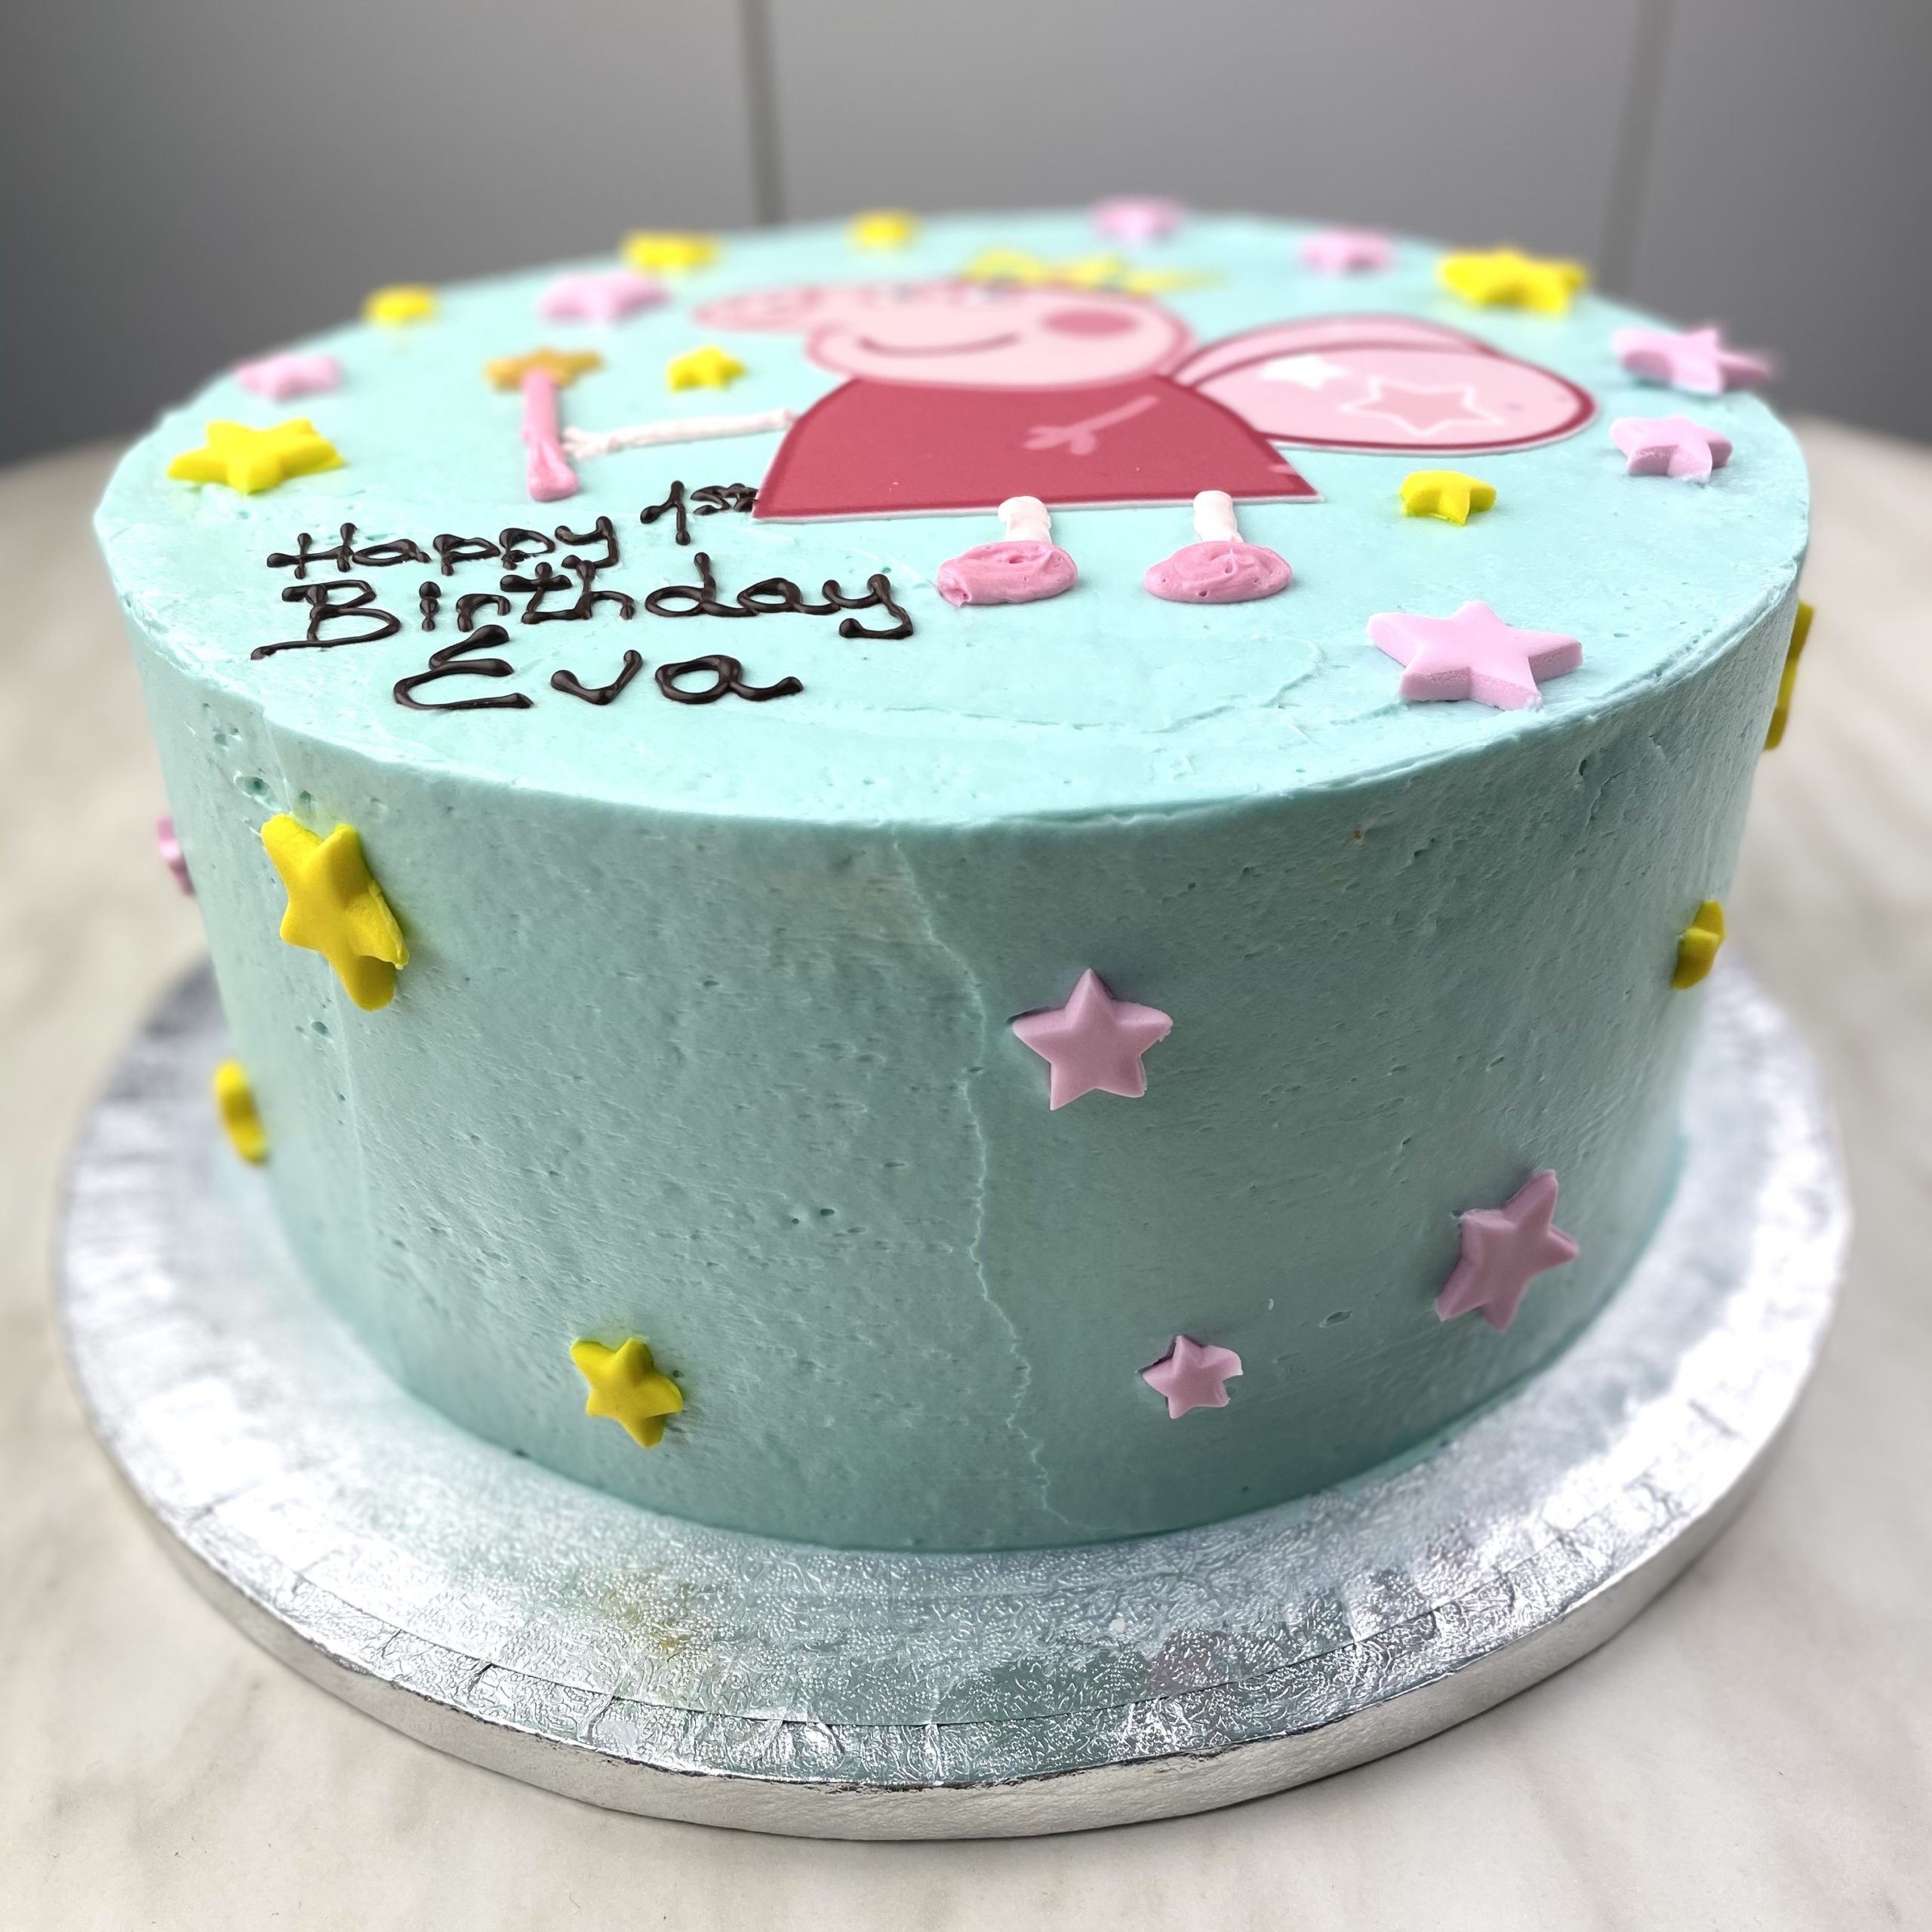 Peppa Pig Cake | Kids With Food Allergies-sonthuy.vn